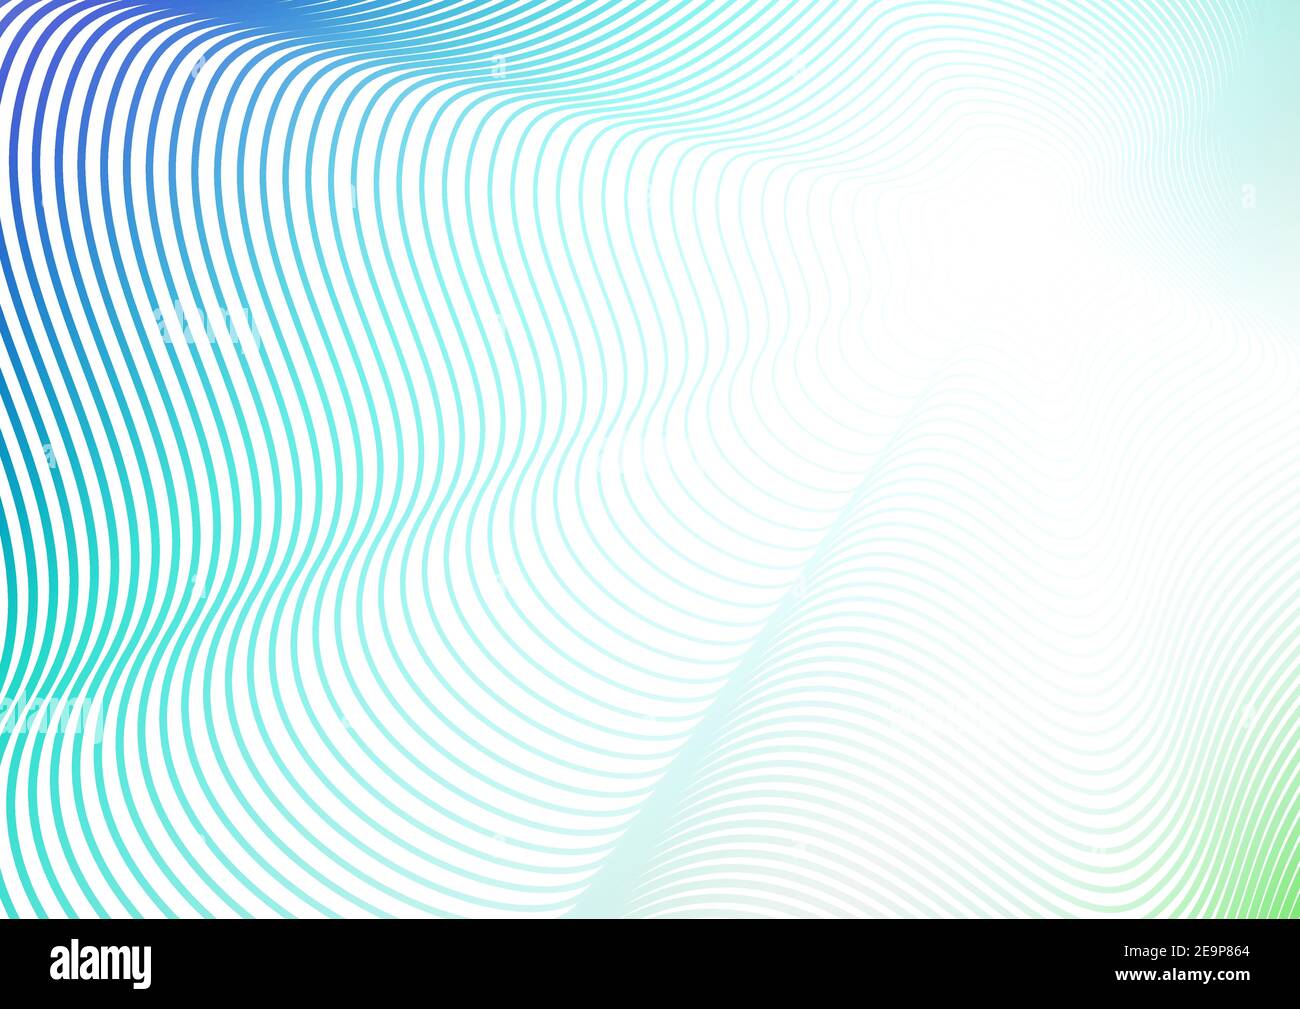 Wave design, background with flash effect. Turquoise, blue, green, white gradient. Futuristic line art pattern. Vector colored abstraction. EPS10 Stock Vector